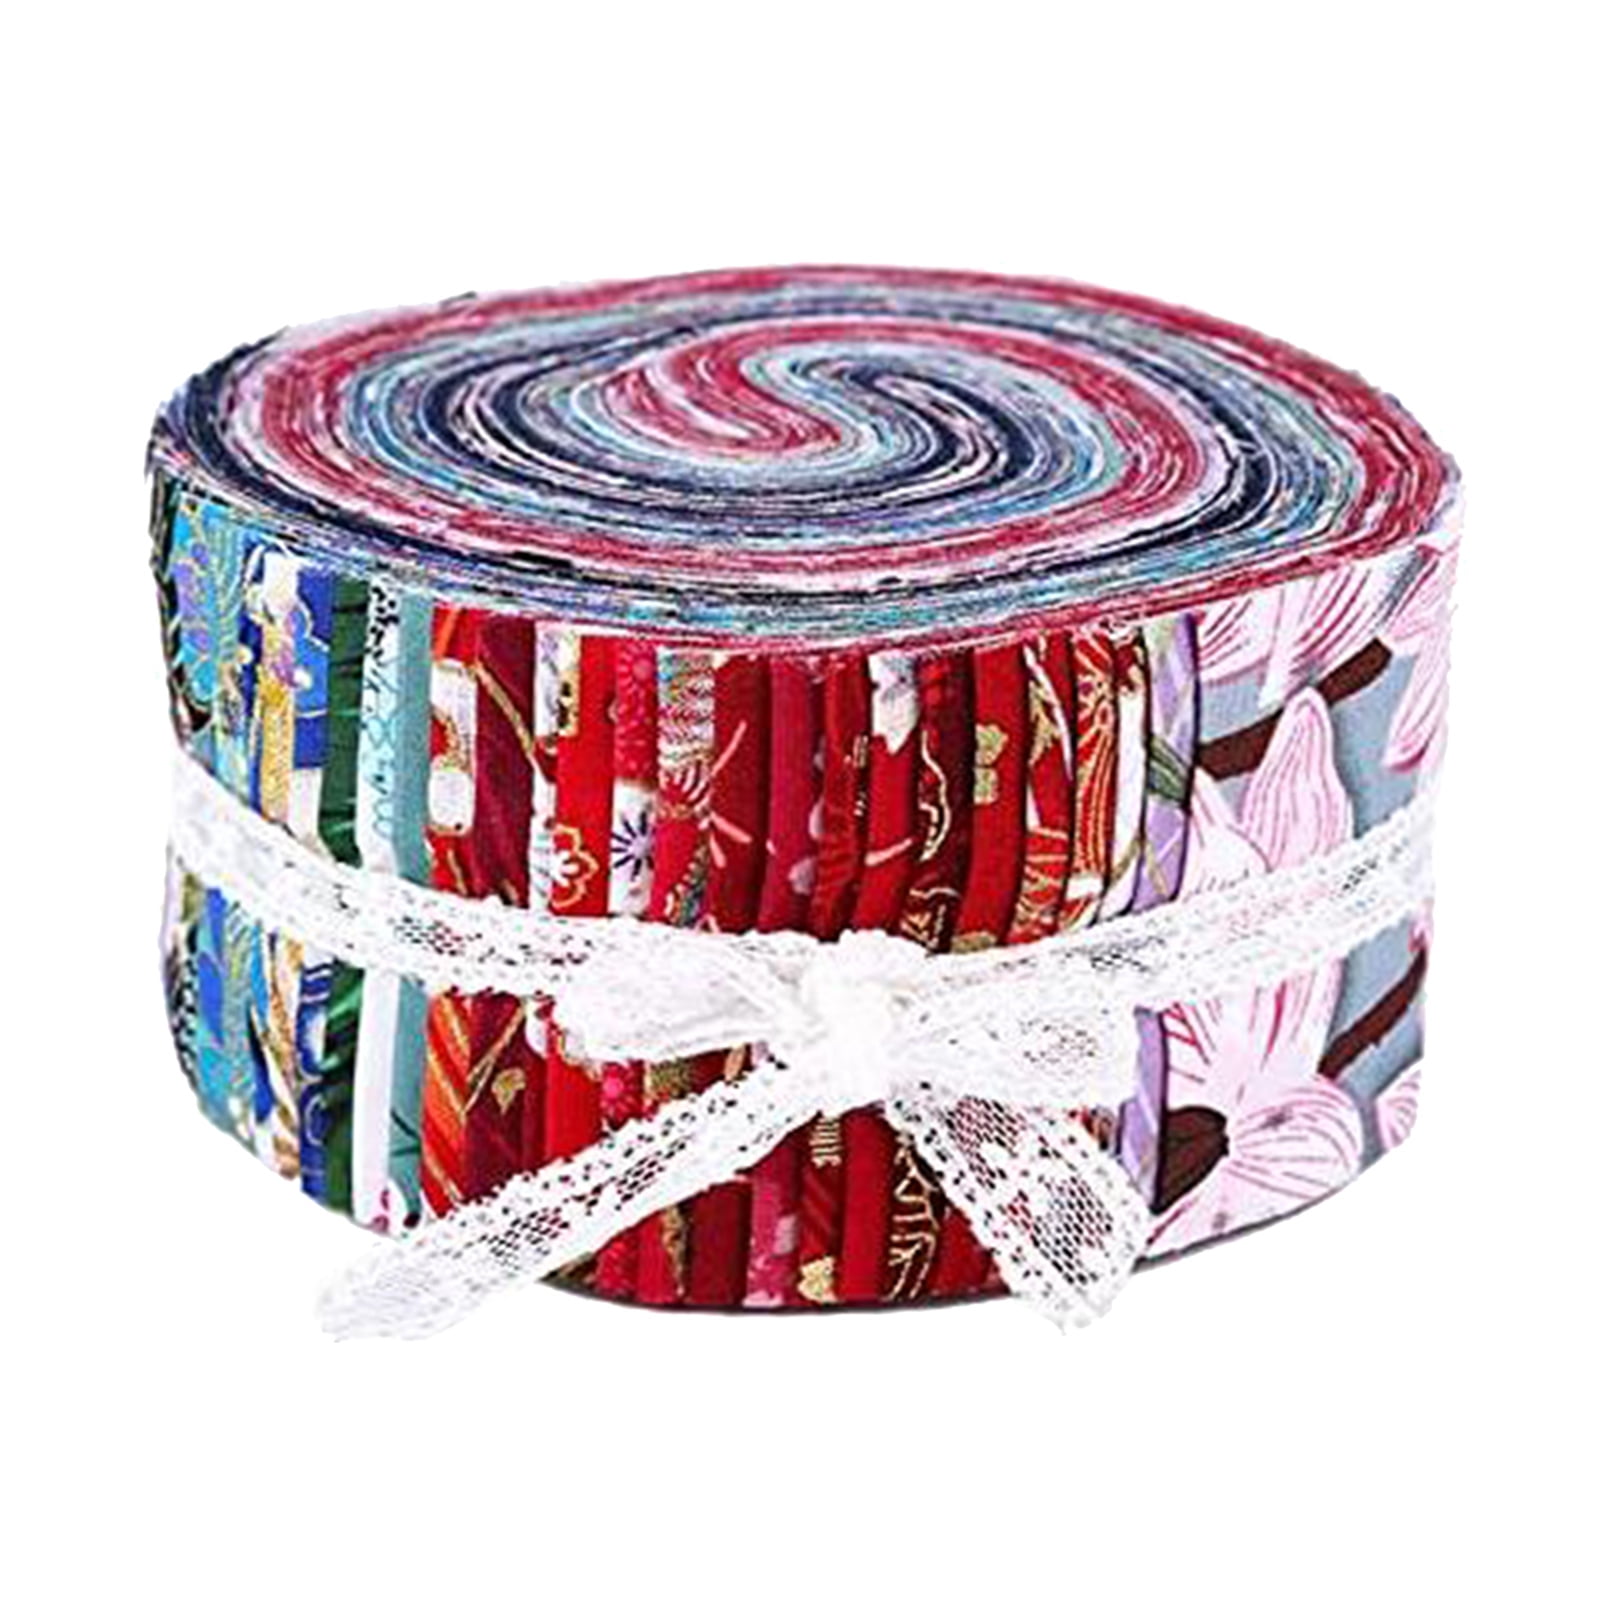 36 Pieces Jelly Roll Multi-Color Fabric Quilting Fabric Strips with  Different Patterns for Sewing Quilting Crafting Home DIY